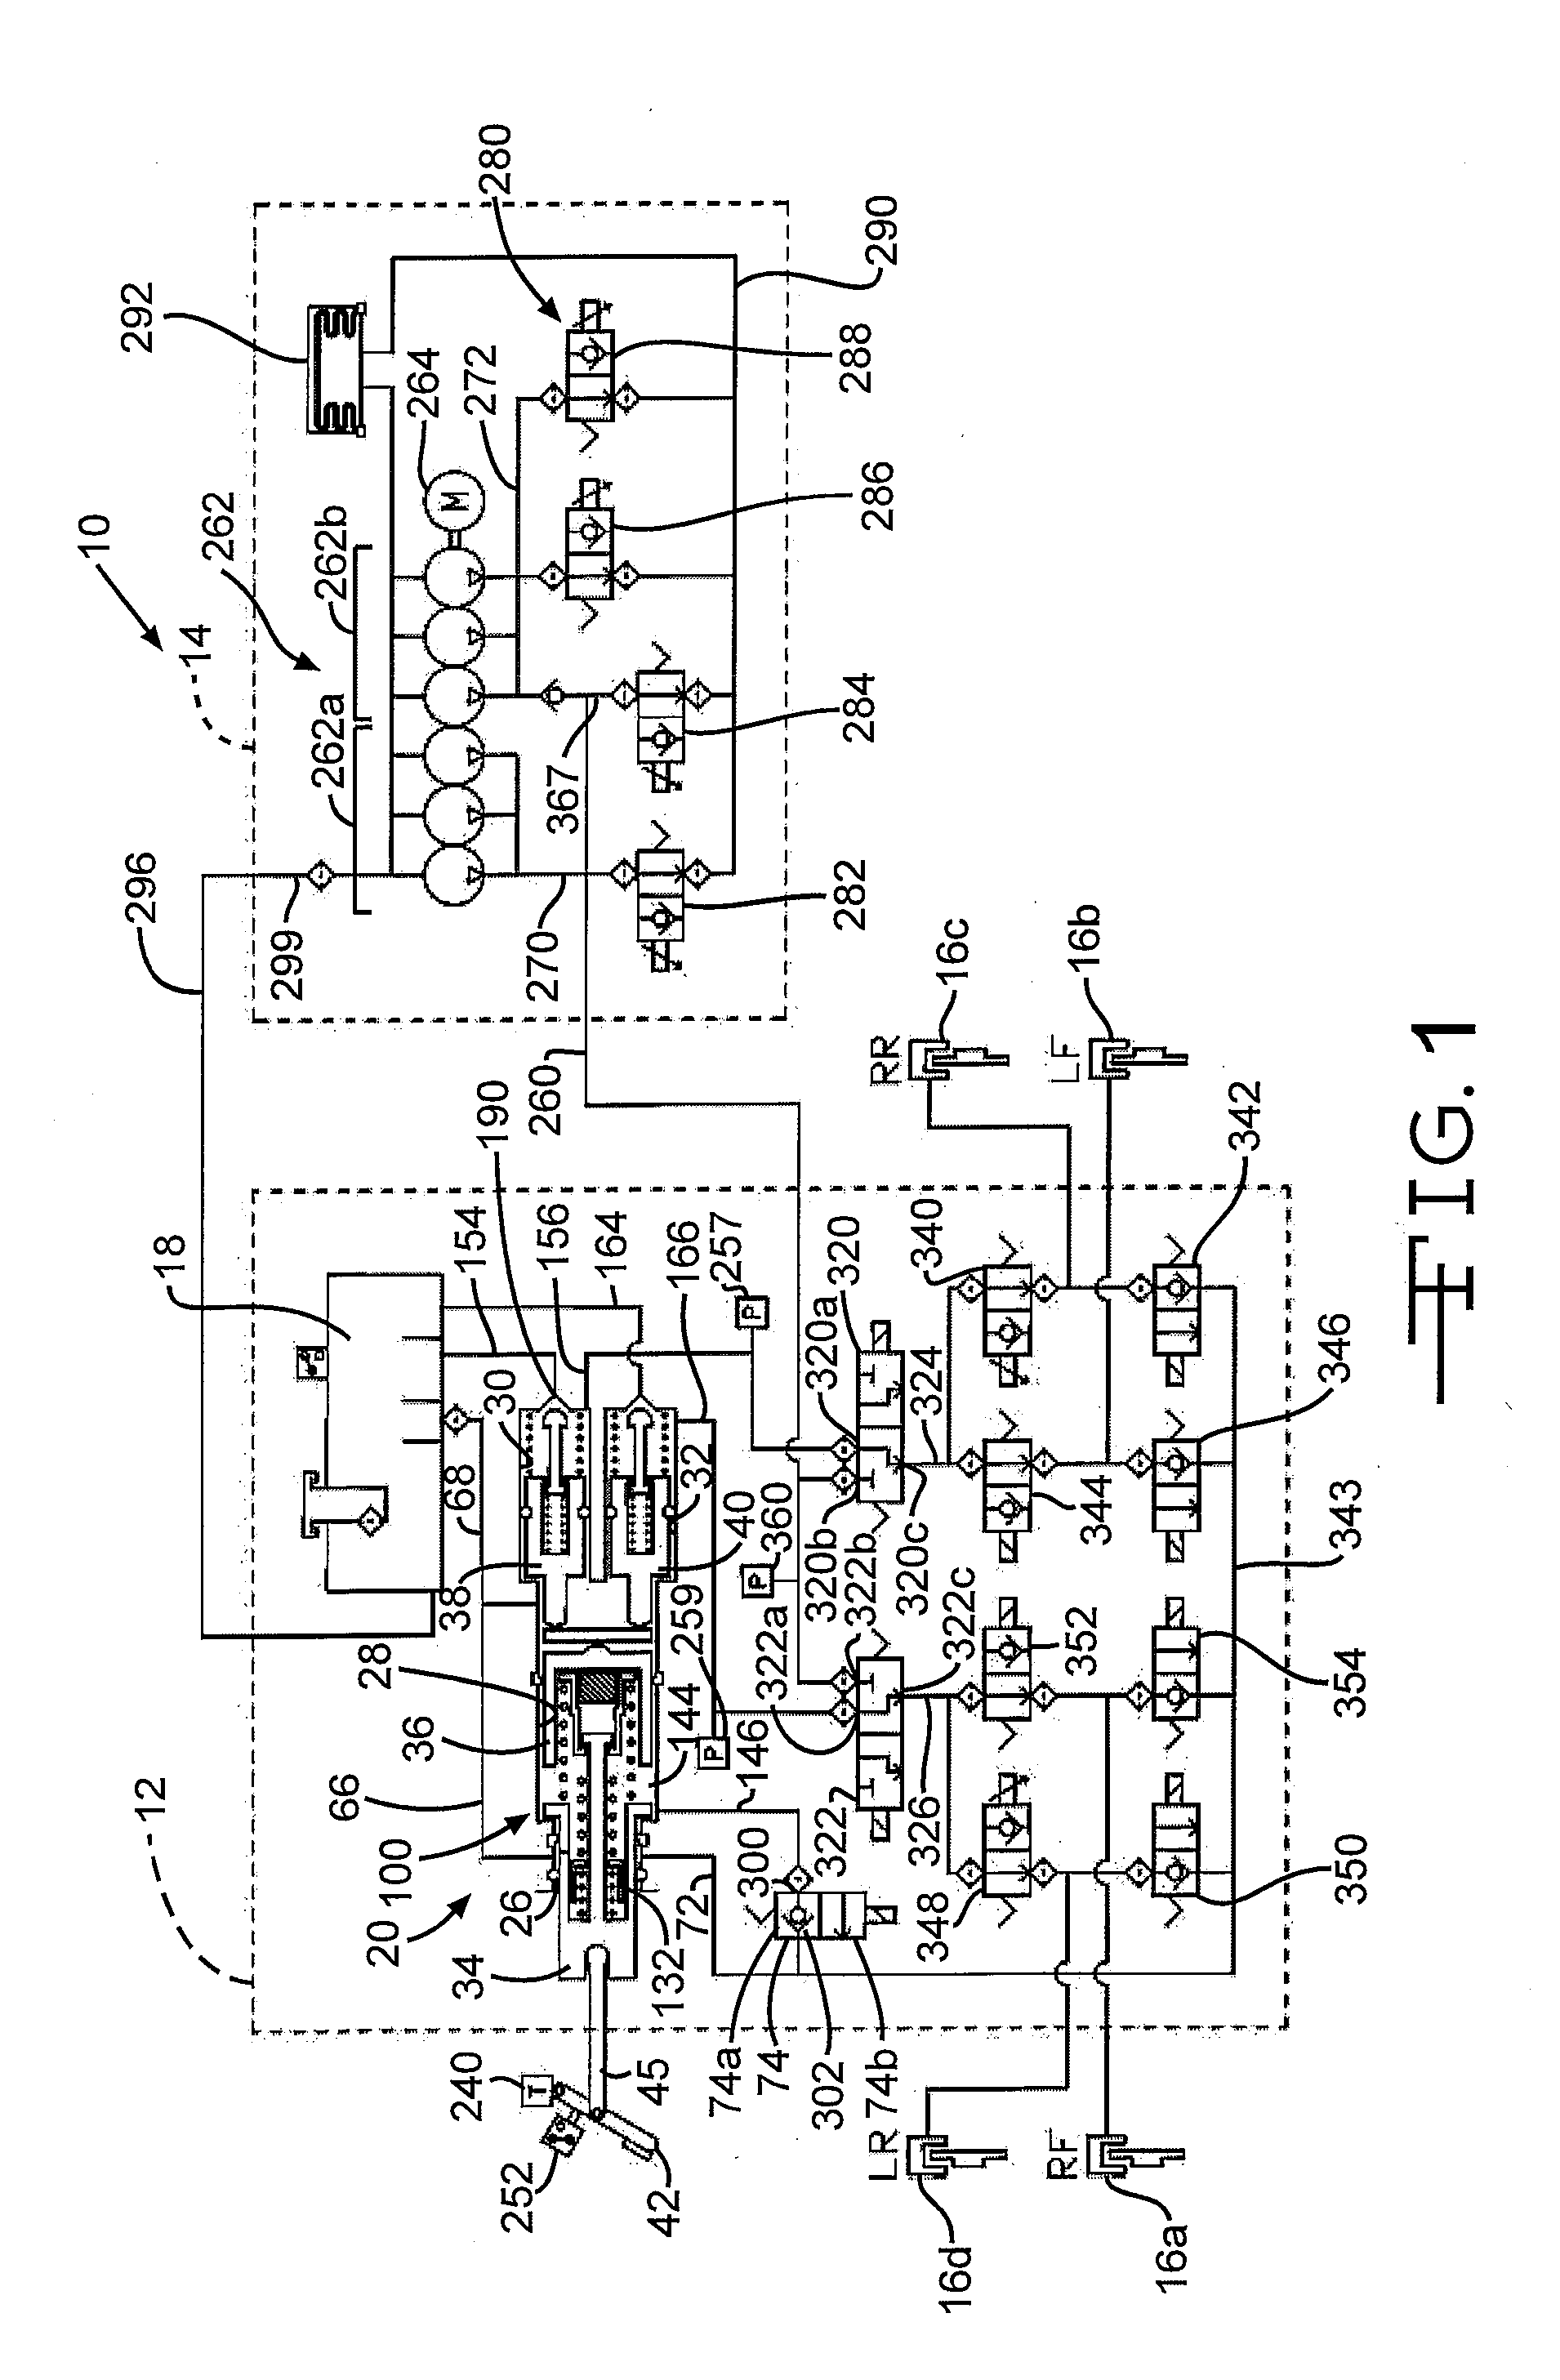 Hydraulic brake system with controlled boost